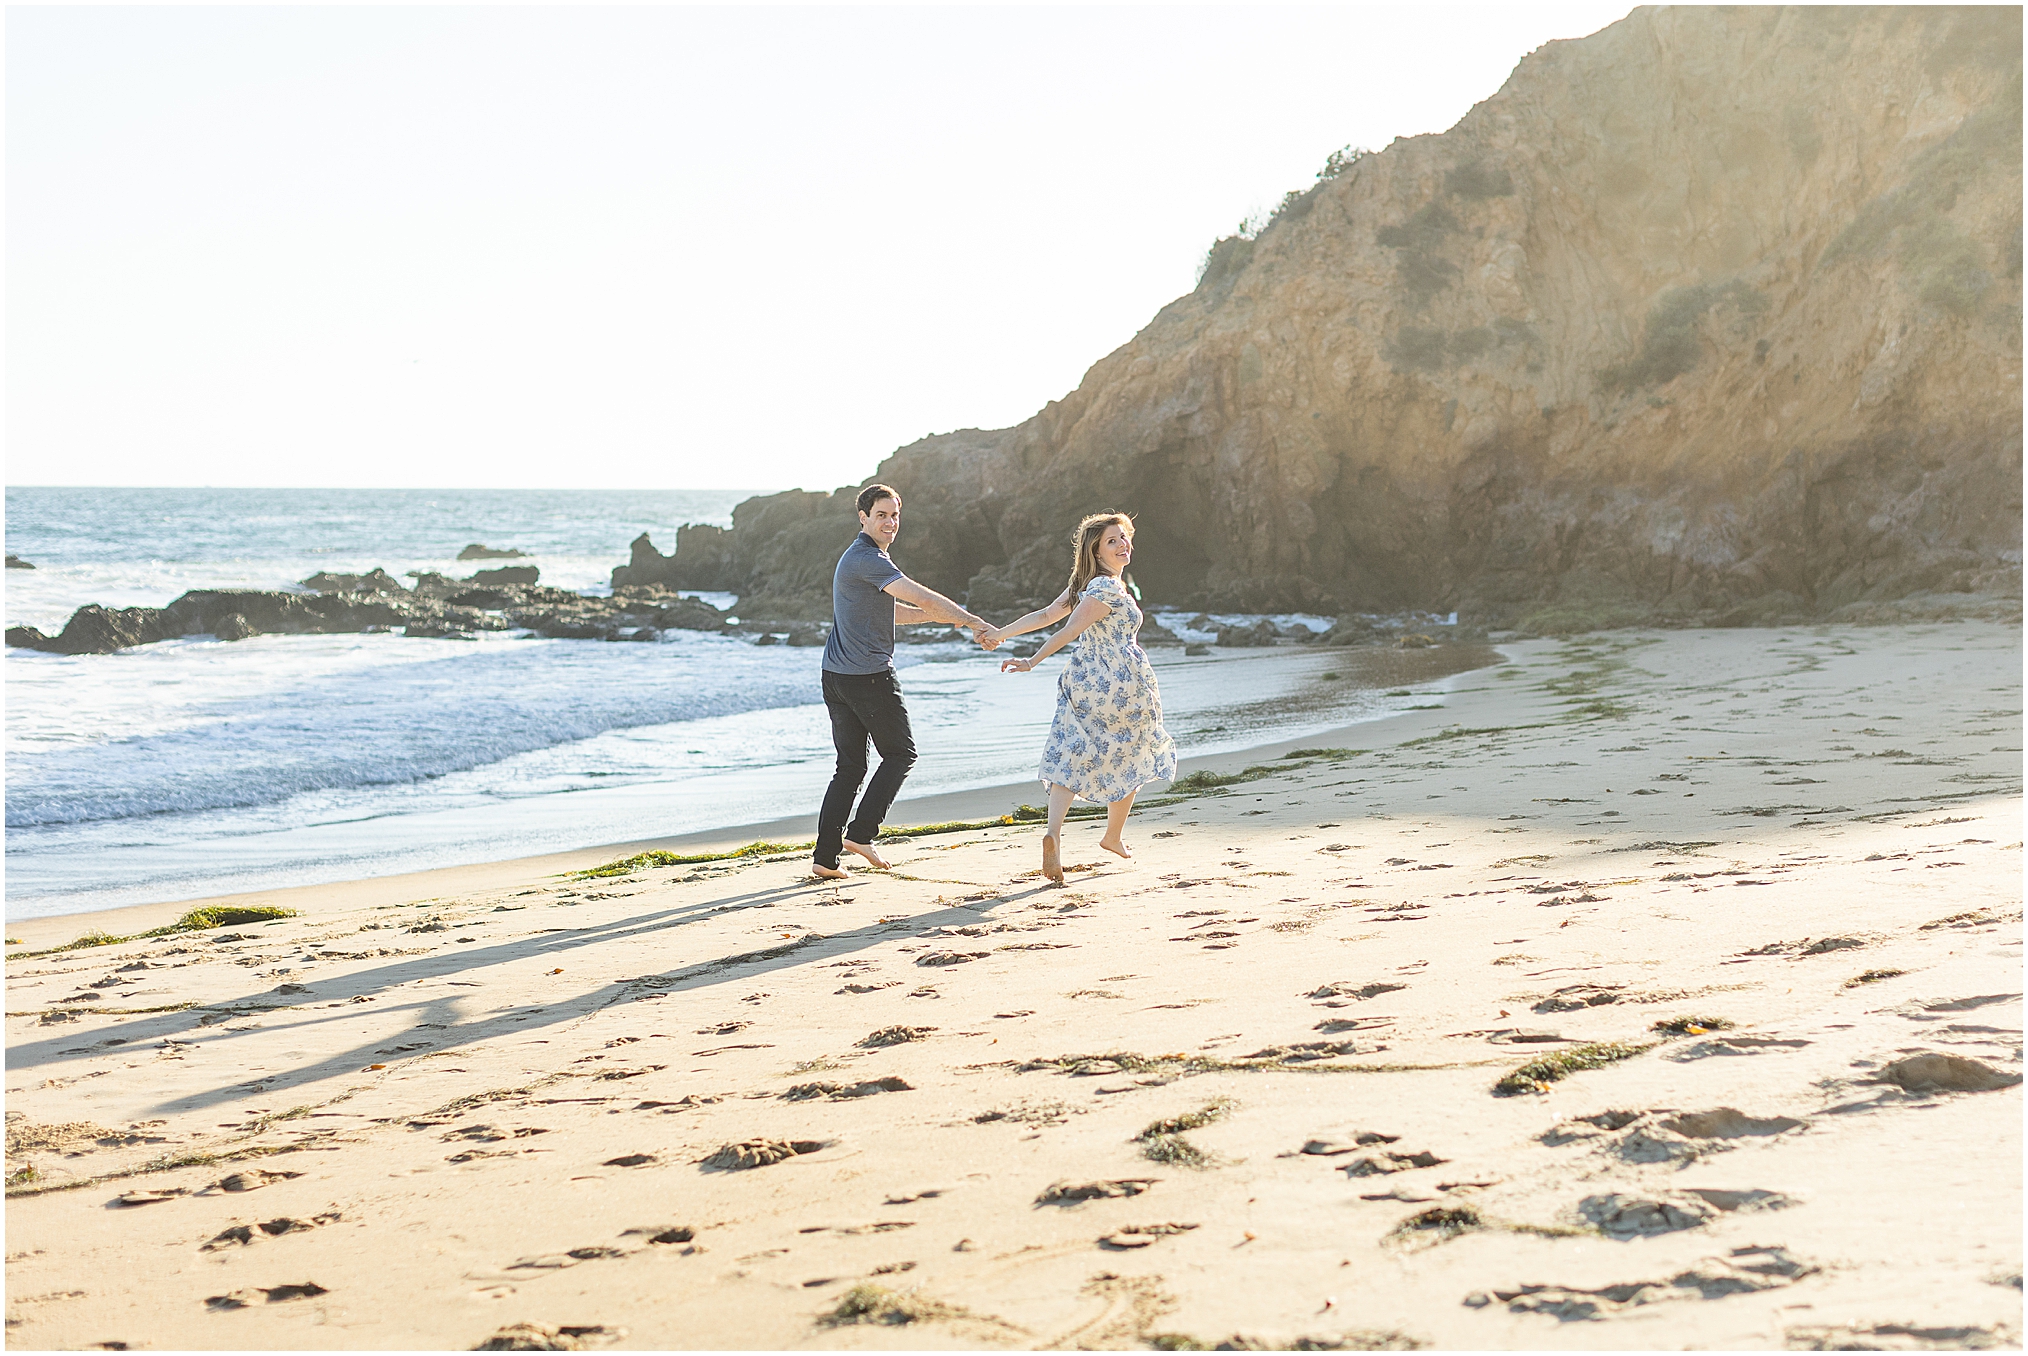 An Irvine Cove Engagement Session in Laguna Beach at golden hour. This lovely couple play on the beach in the golden sunset.